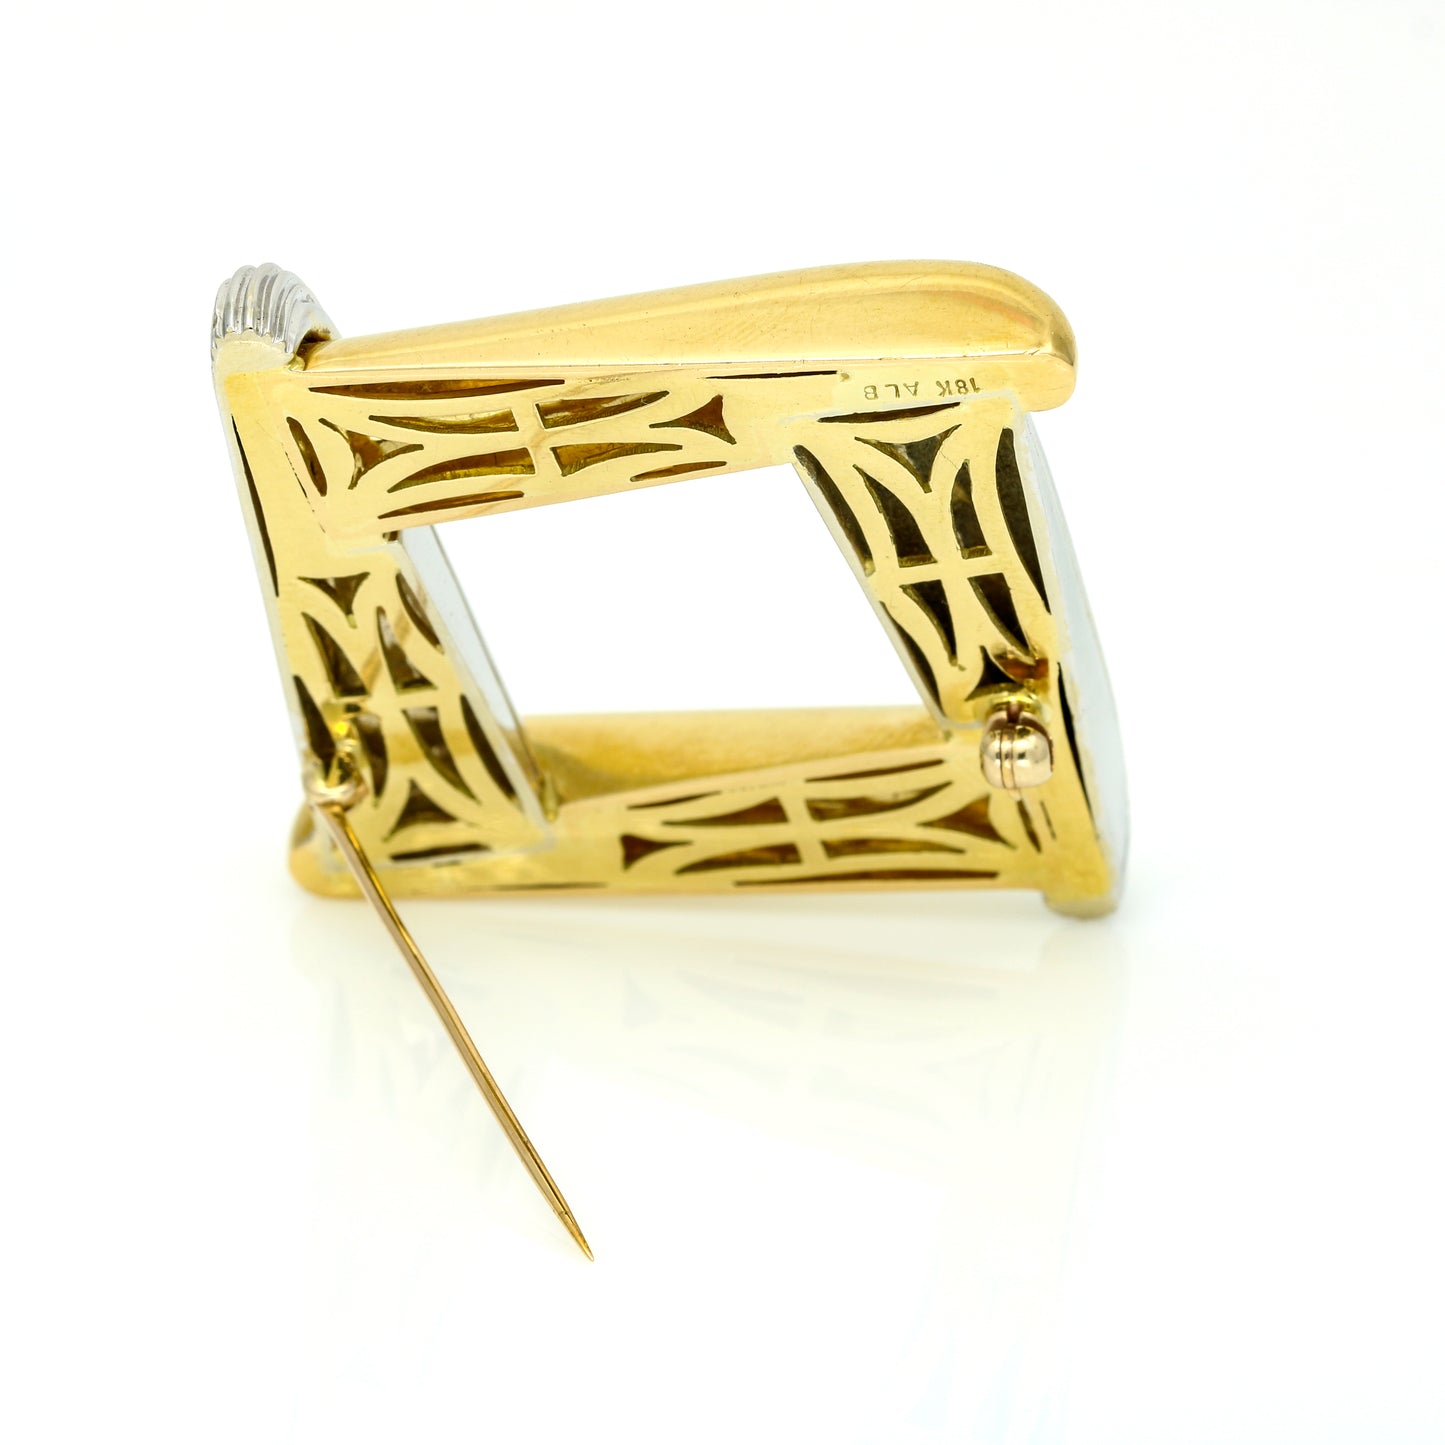 Vintage Geometric Brooch Modernist Style in 18k White and Yellow Gold